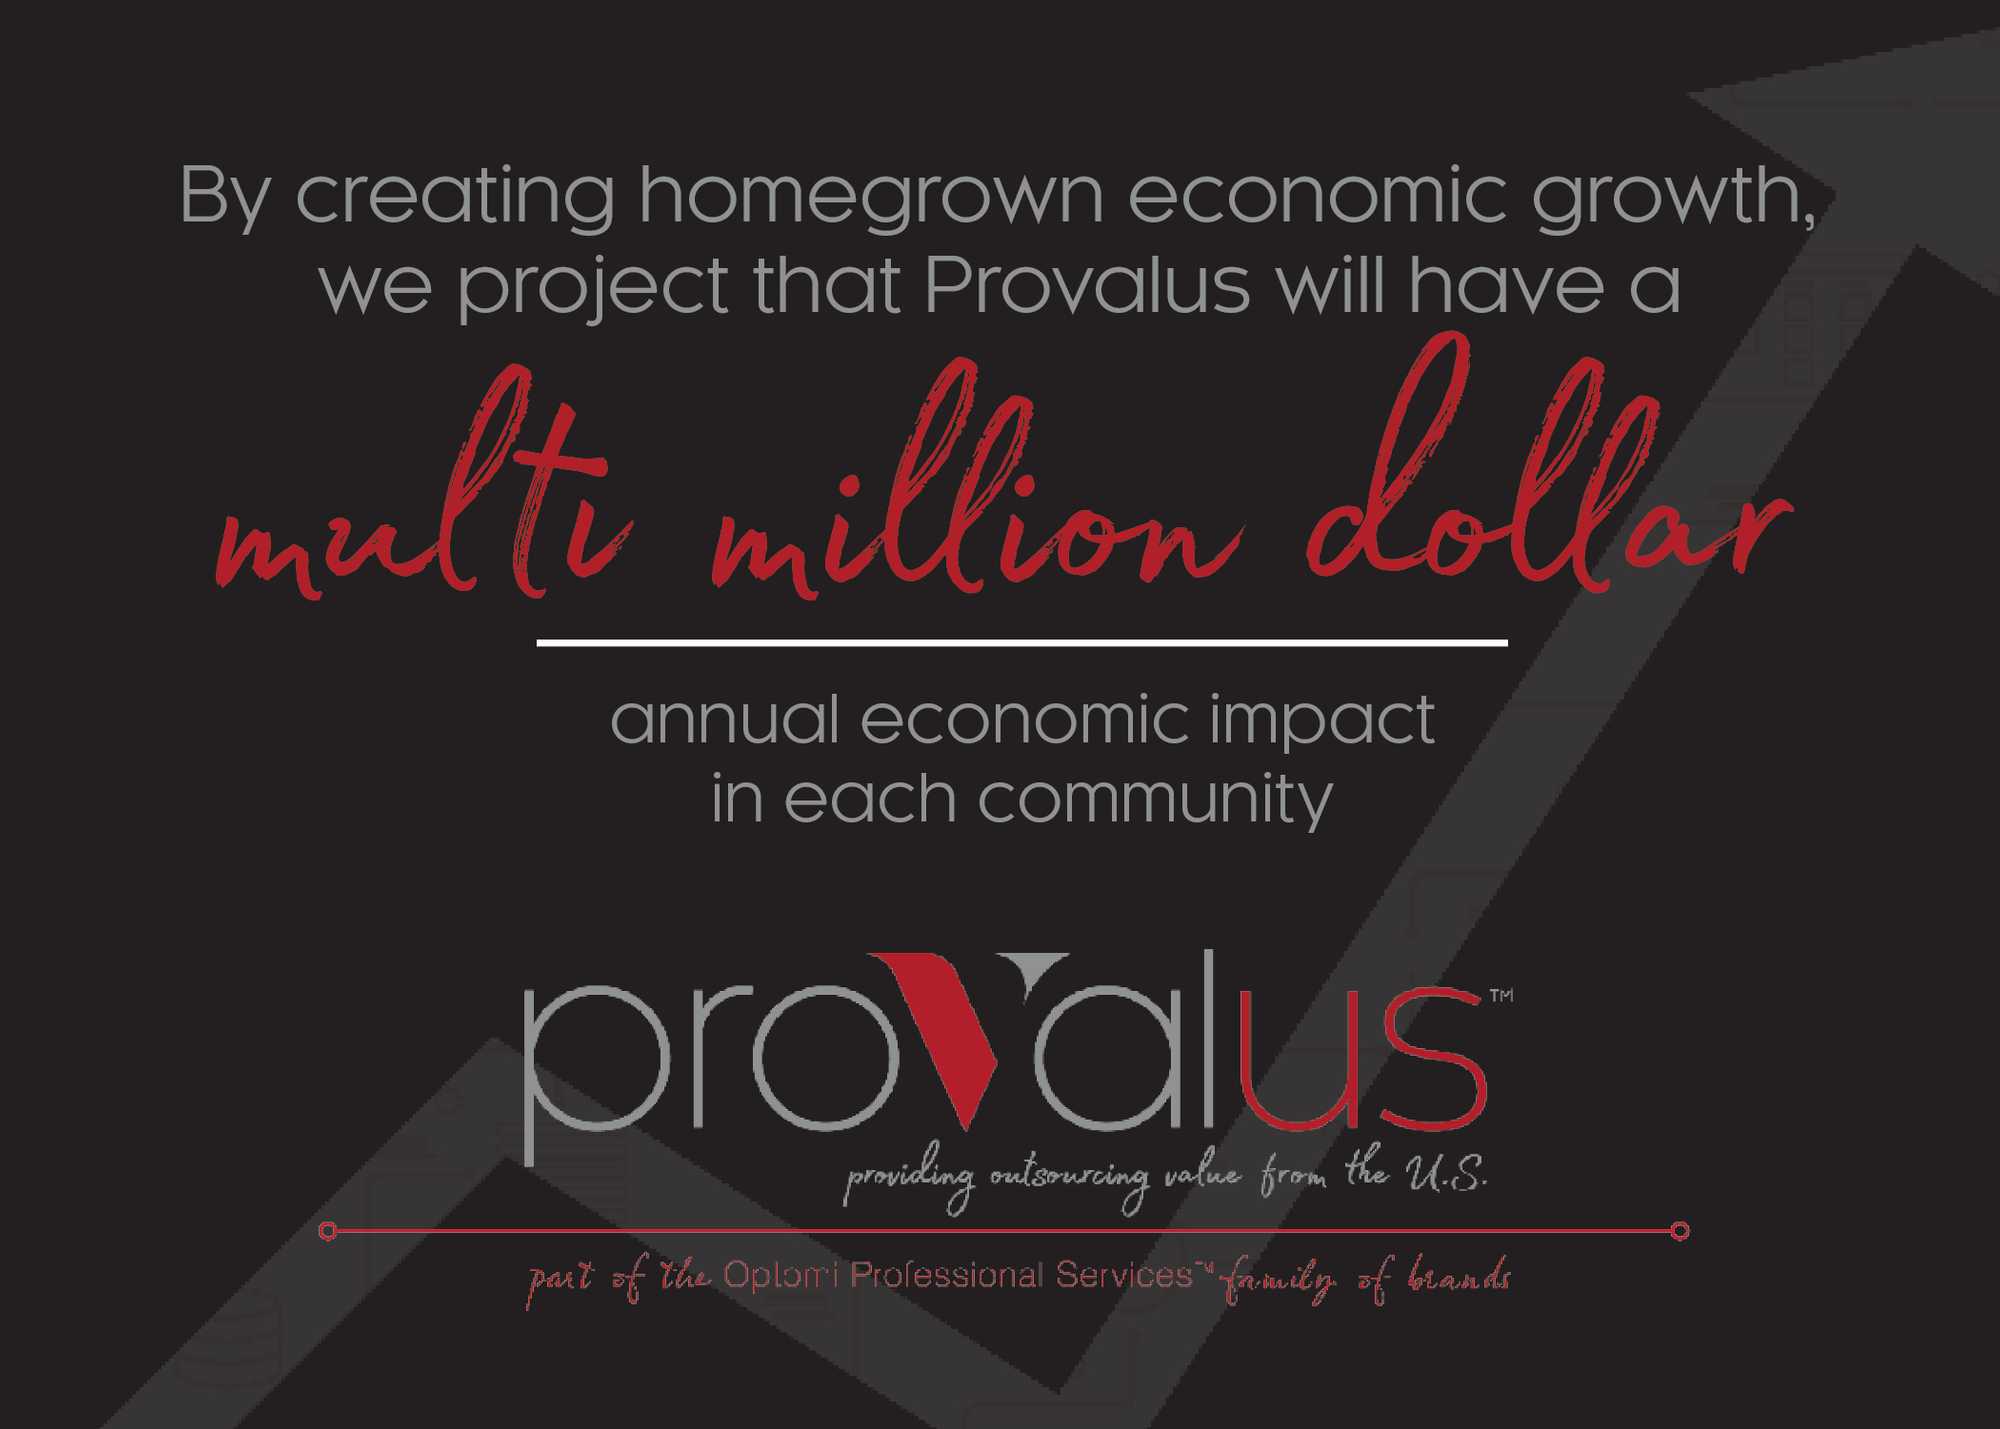 Provalus Featured for Helping Combat the Unemployment Crisis Through Tech, Business, and Support Career Training